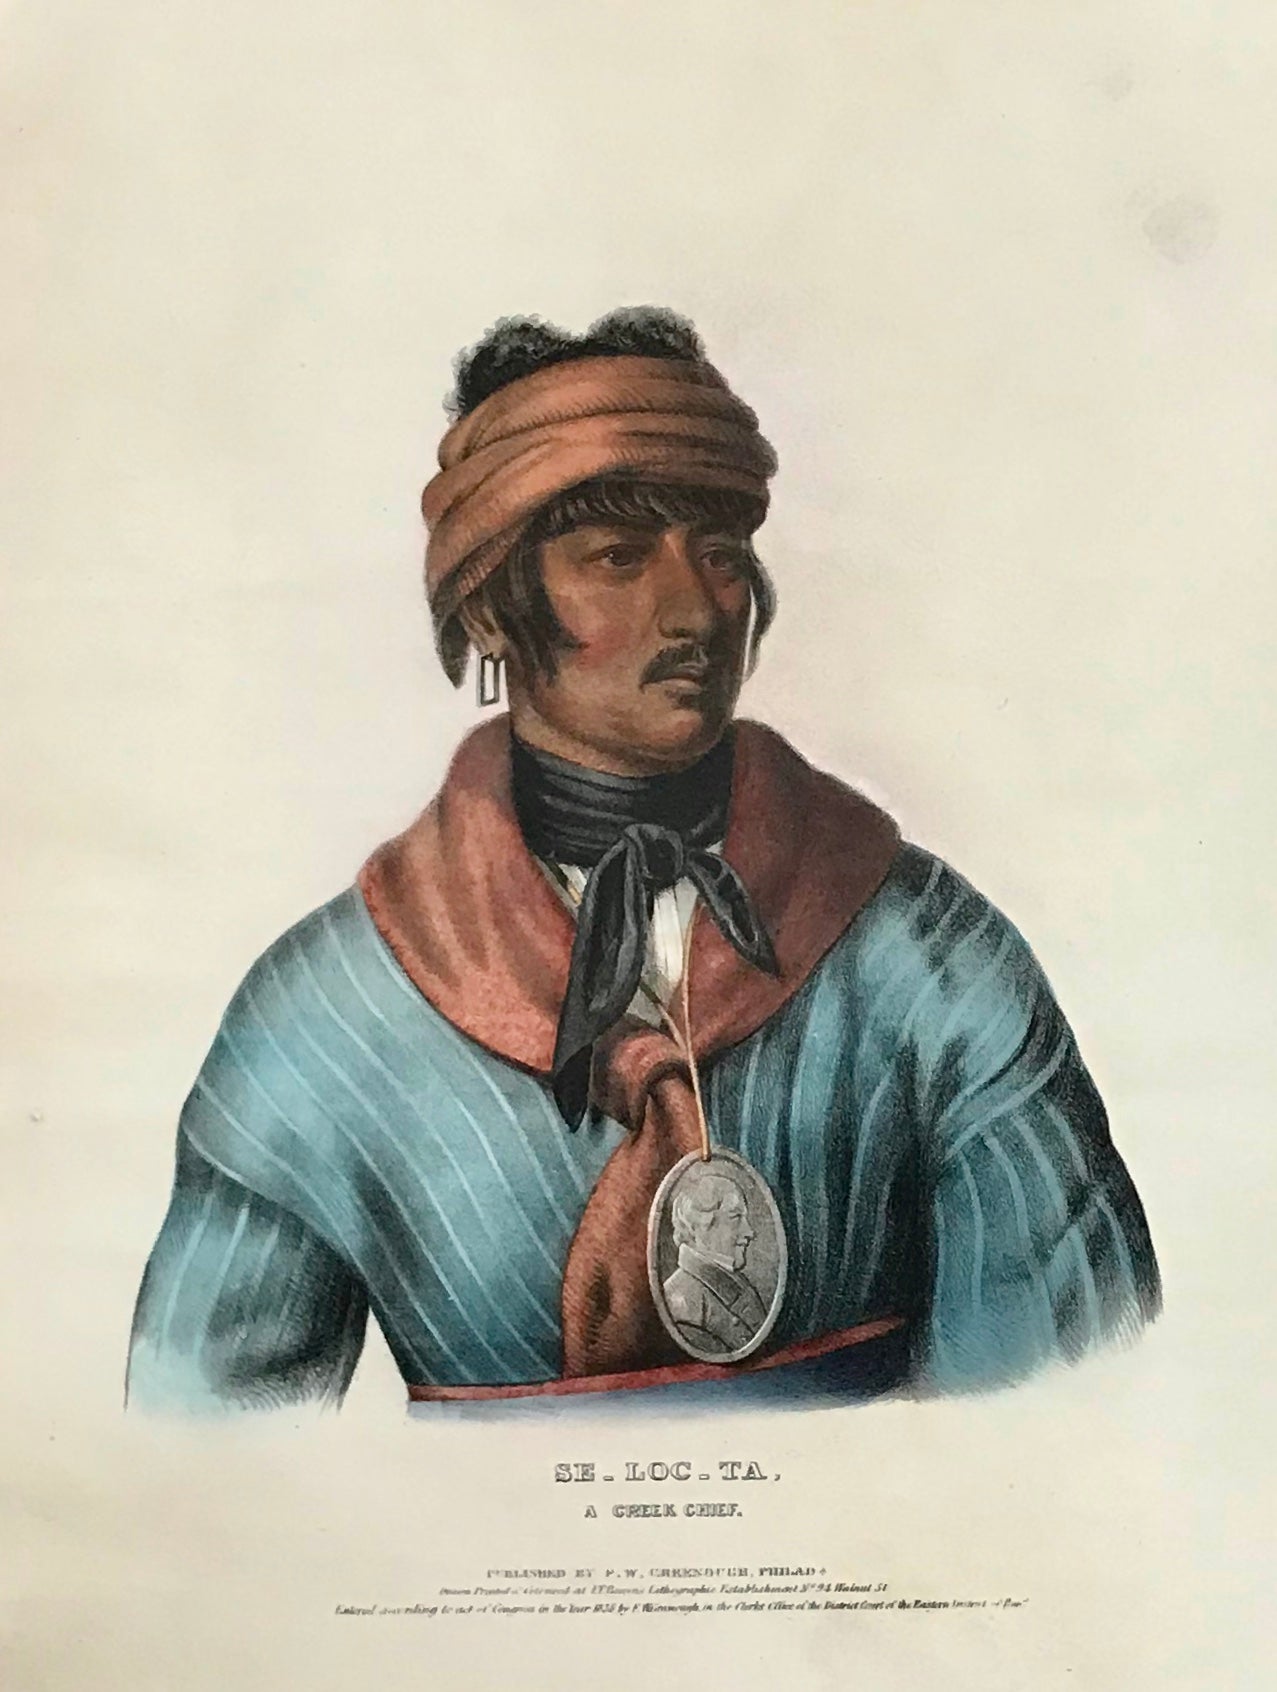 "Se-Loc-Ta. A Creek Chief" Lithograph. Original hand coloring Painting by Charles Bird King (1785-1862) Published in: "History of the Indian Tribes of North America" Authors: Thomas Loraine McKenny (1785-1859) and James Hall (1793-1868)